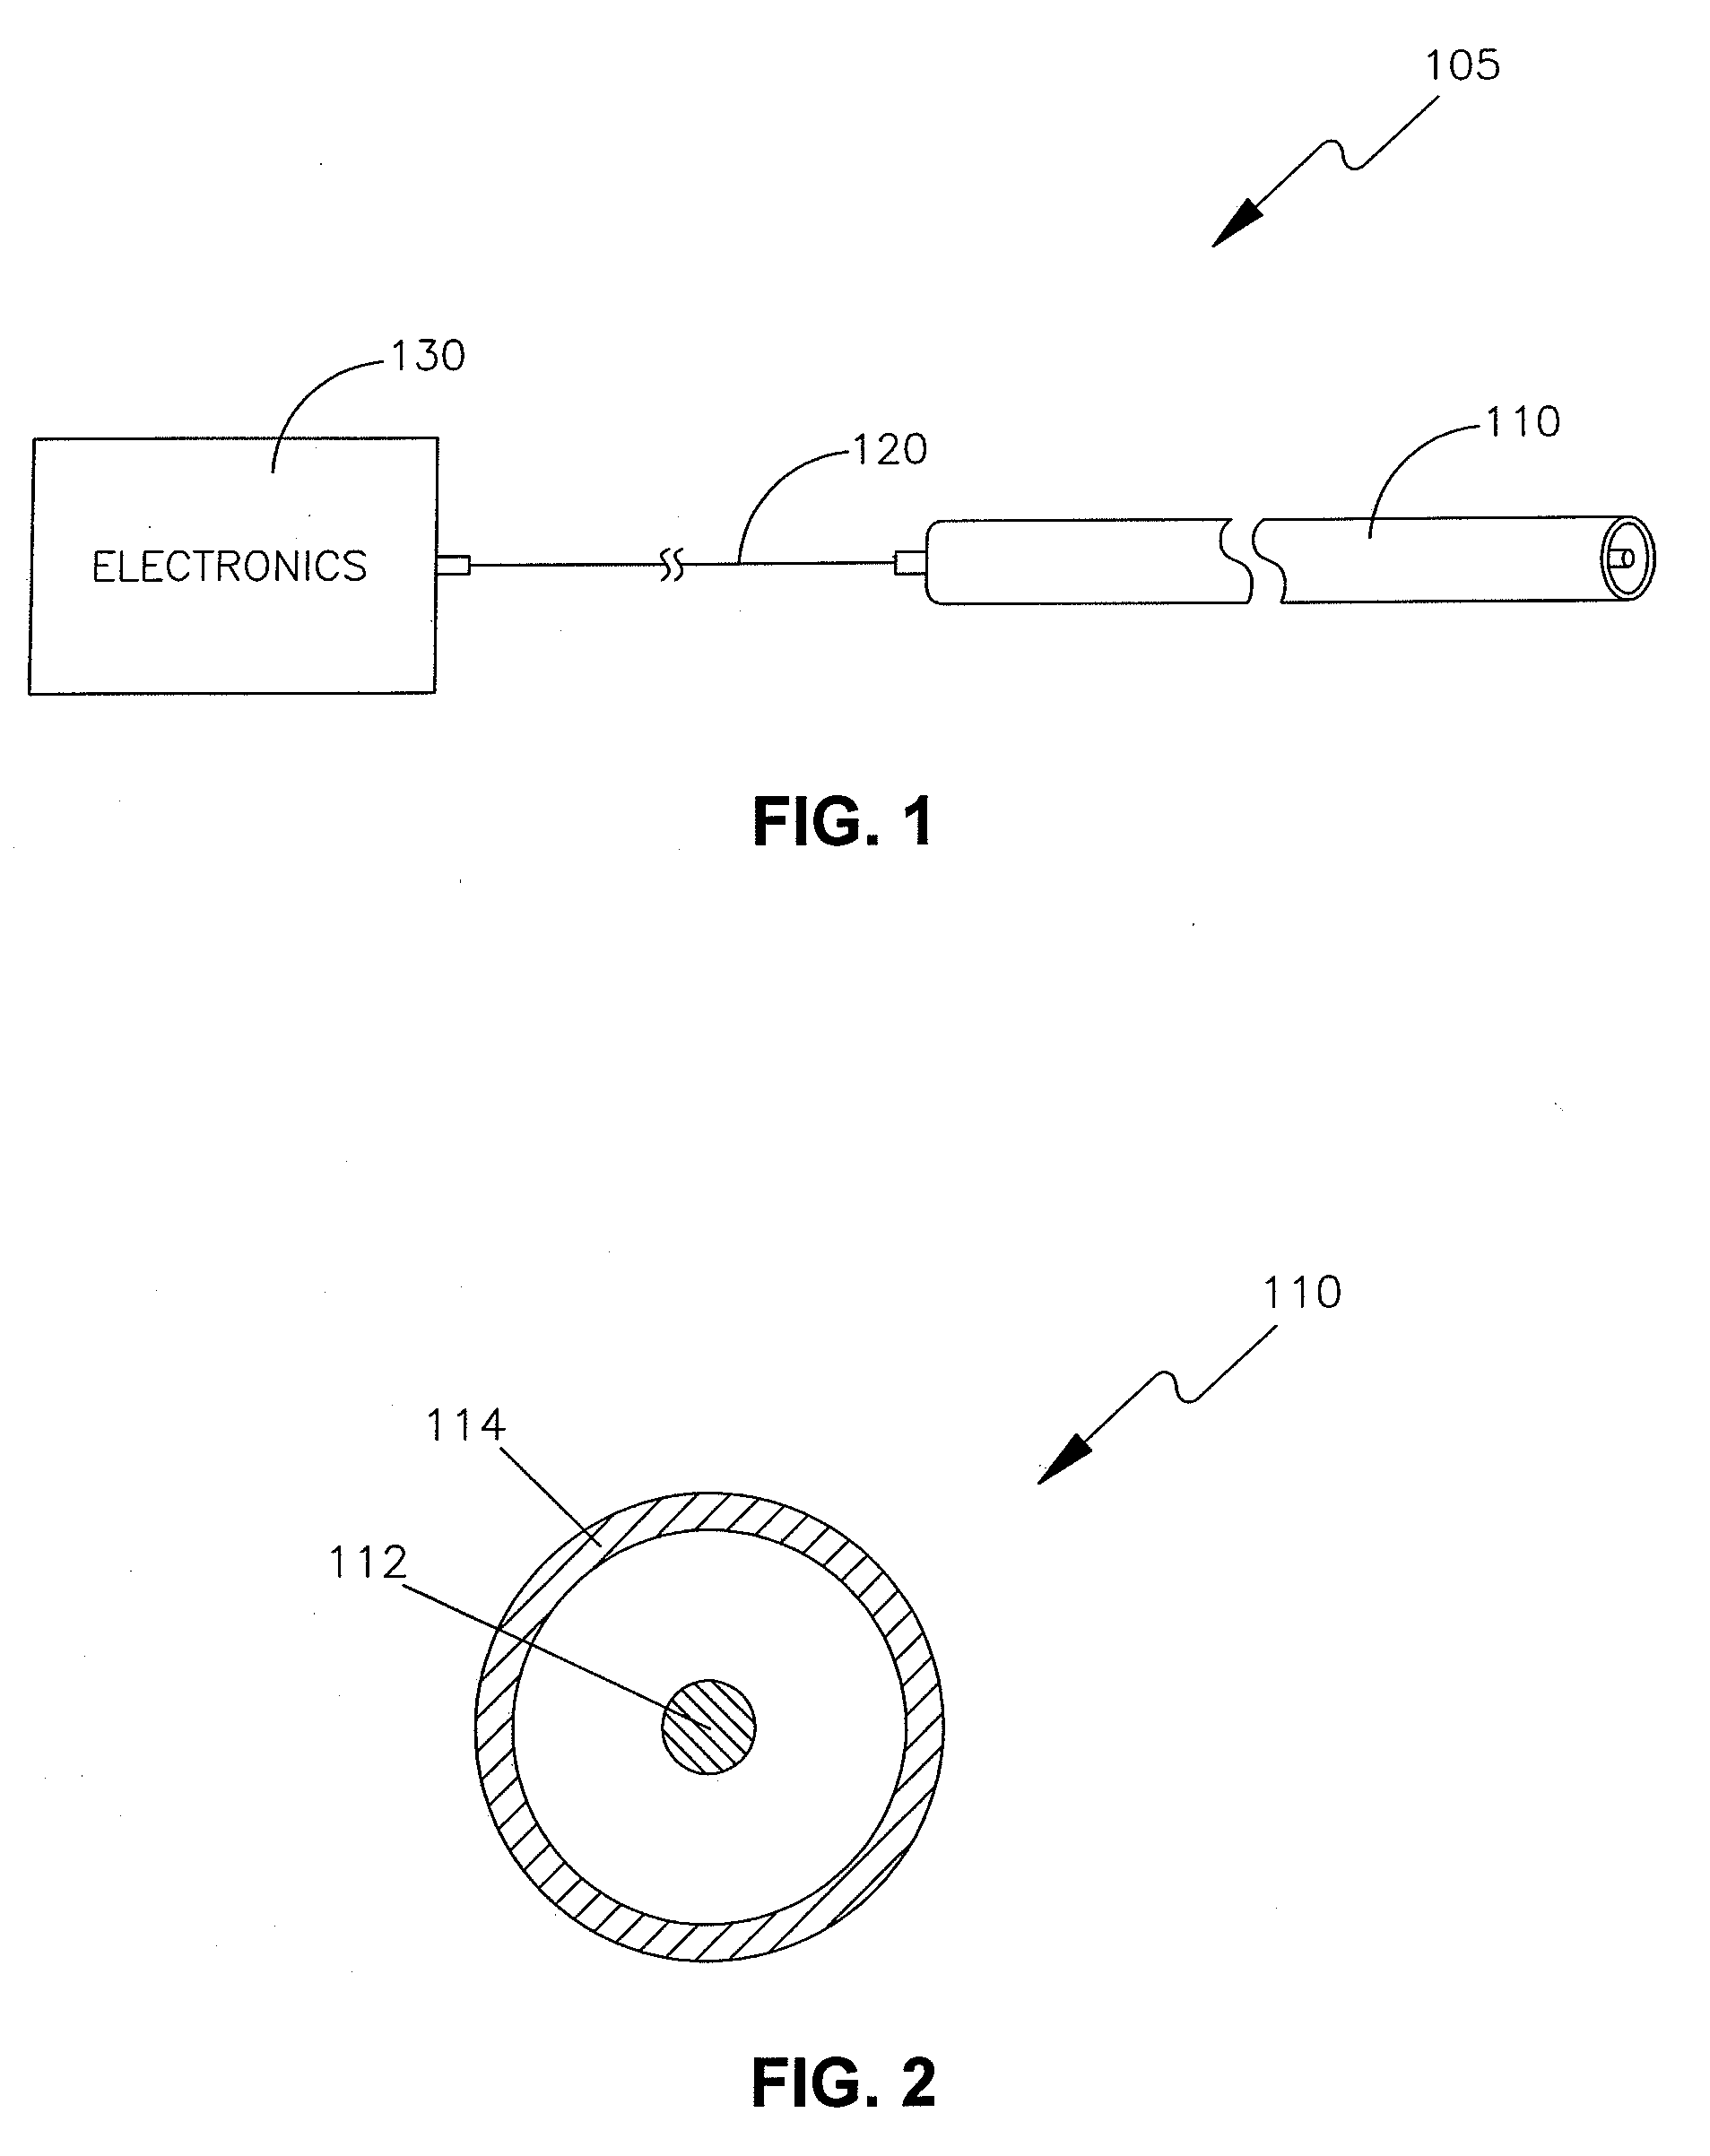 System and method for optimizing sweep delay and aliasing for time domain reflectometric measurement of liquid height within a tank